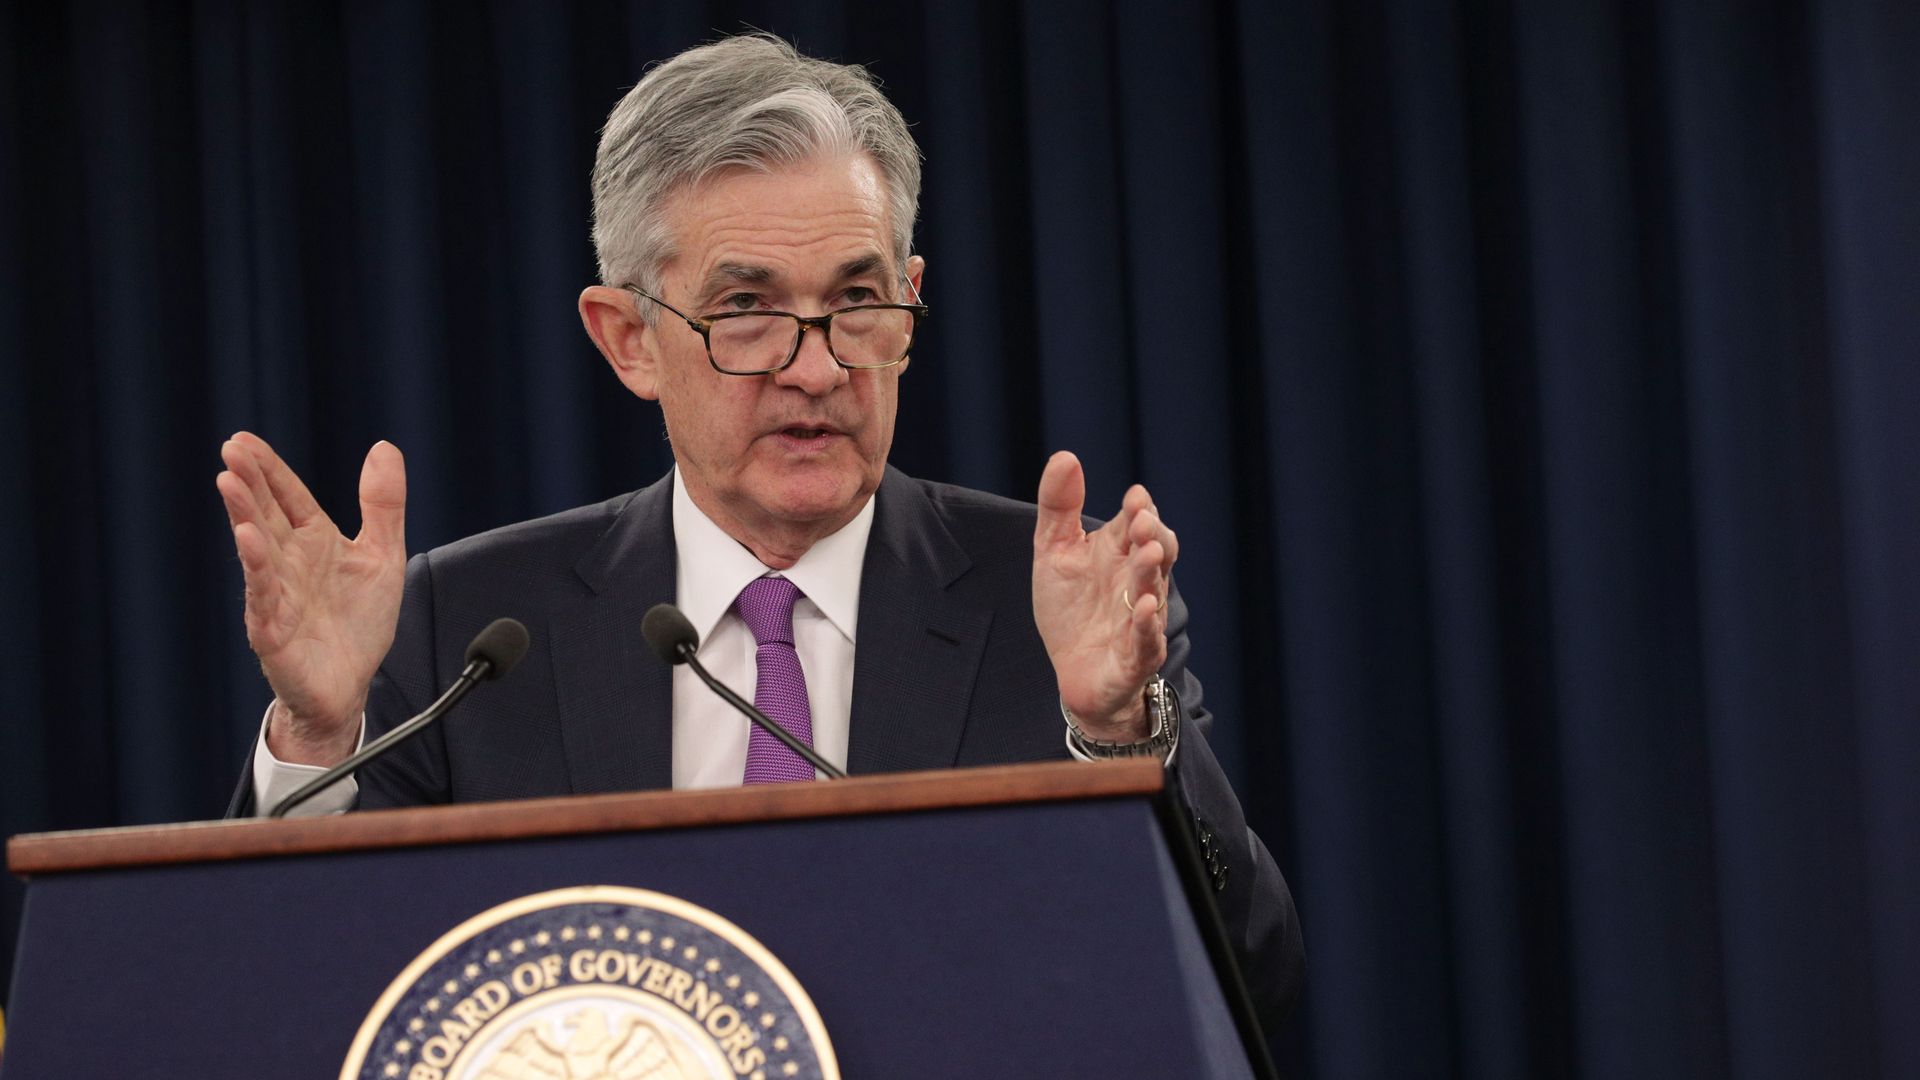 In this image, Federal Reserve Board Chairman Jerome Powell speaks into two microphones from behind a podium. 